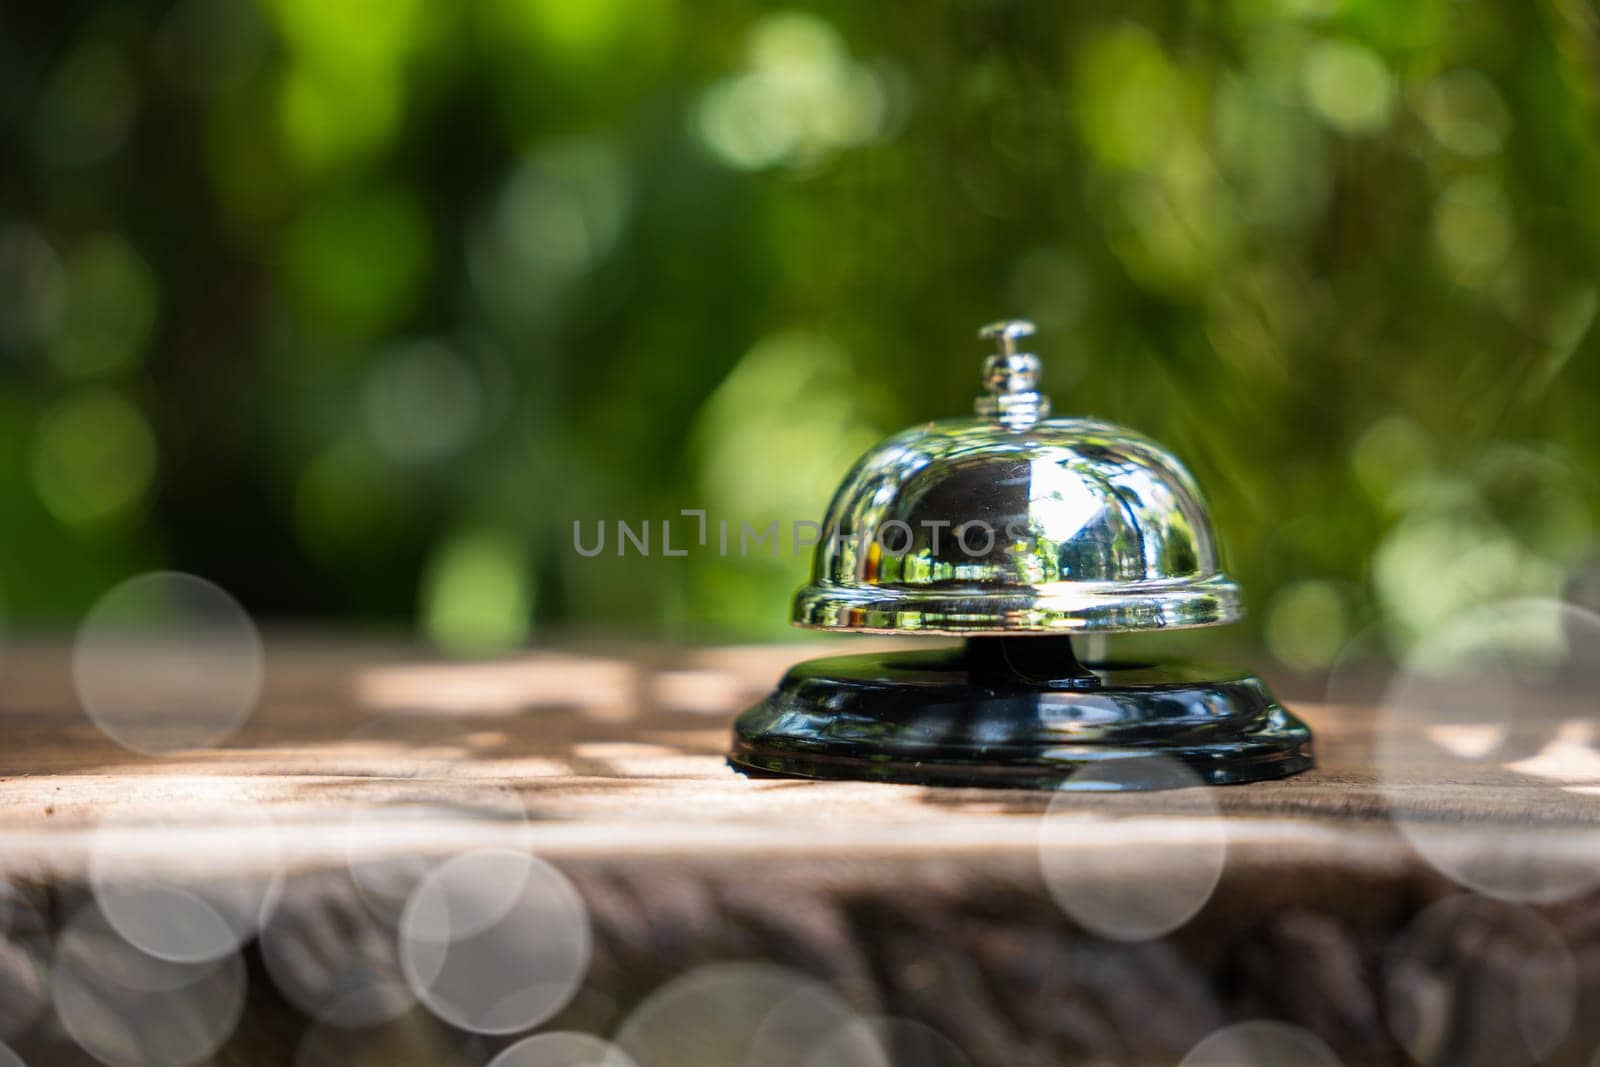 Hotel ring bell. Closeup of silver service restaurant bell on wooden counter desk, vintage bell to call staff outdoor in garden with green leaf